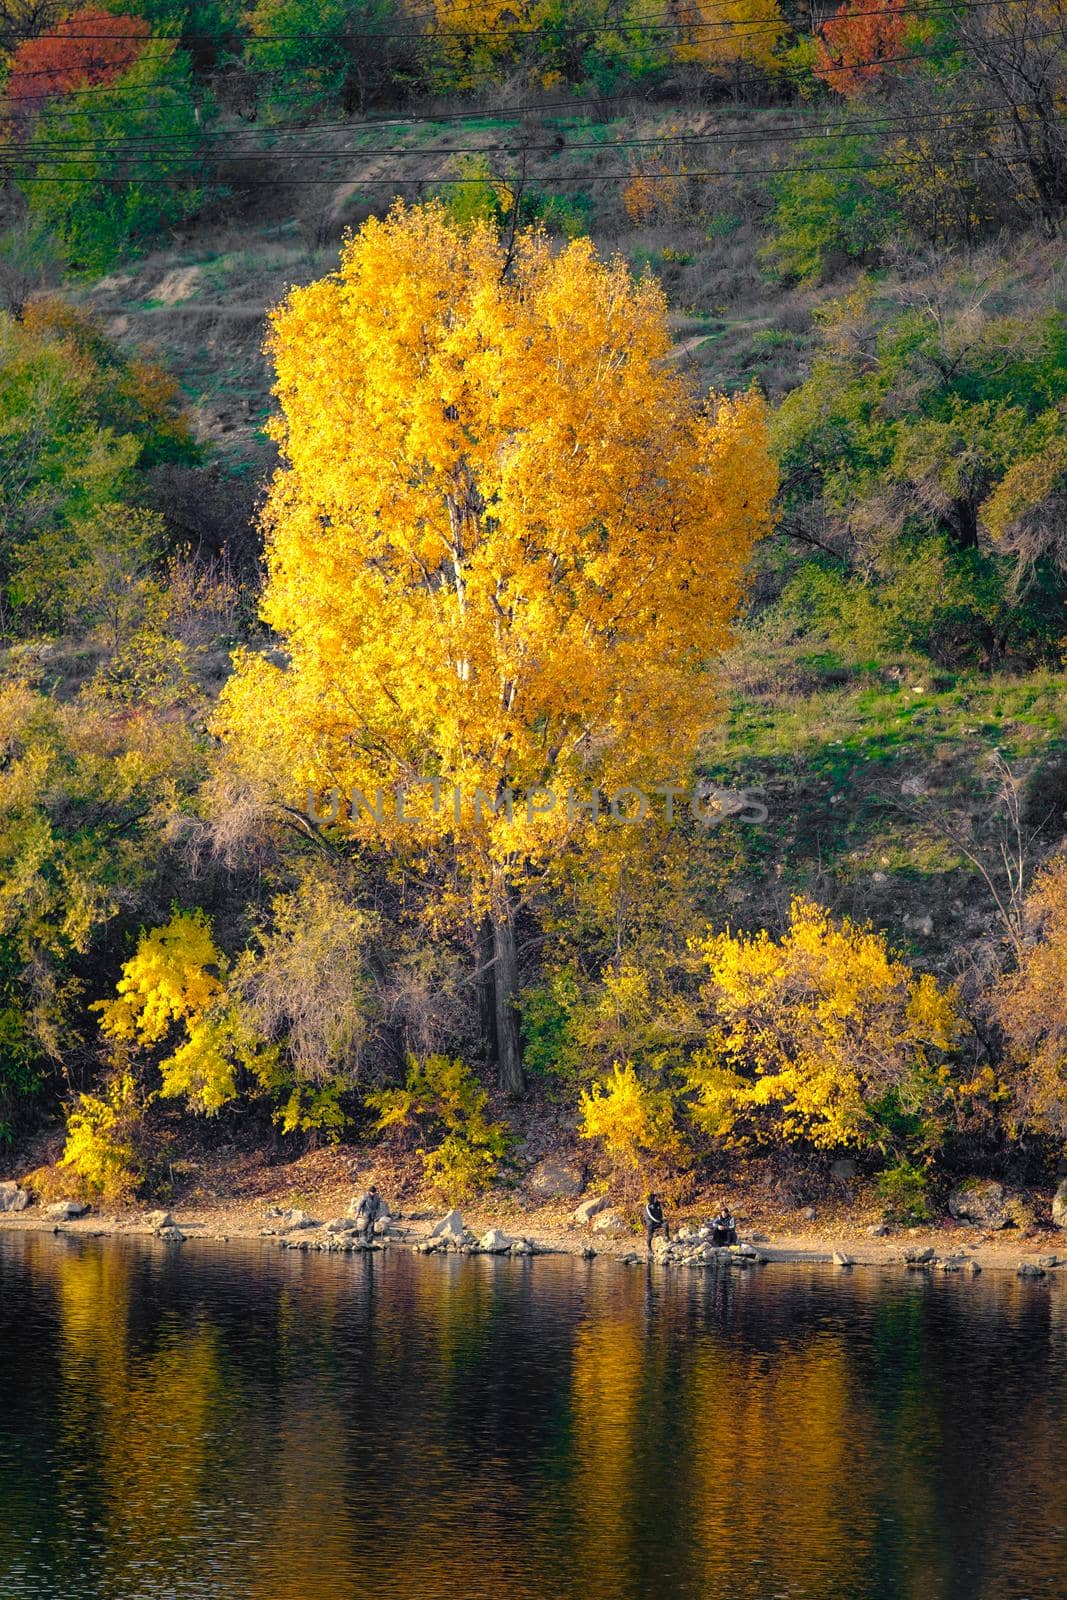 Fantastic autumn landscape on the river. Colorful morning view of autumn yellow and green trees with reflection on water. Beauty of nature concept background.